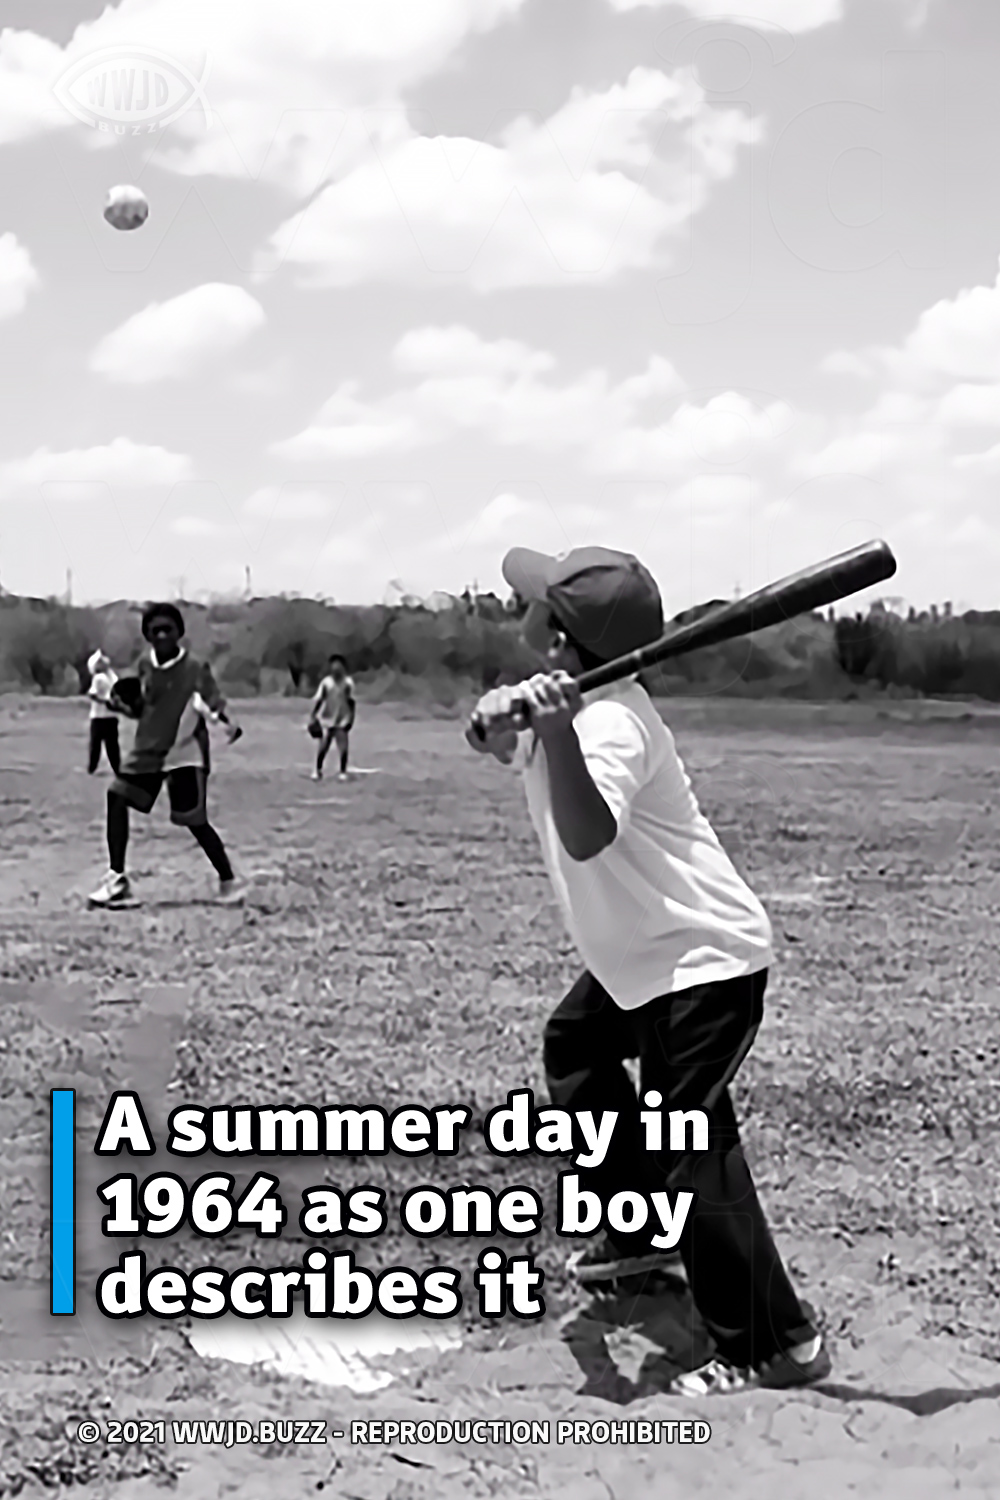 A summer day in 1964 as one boy describes it